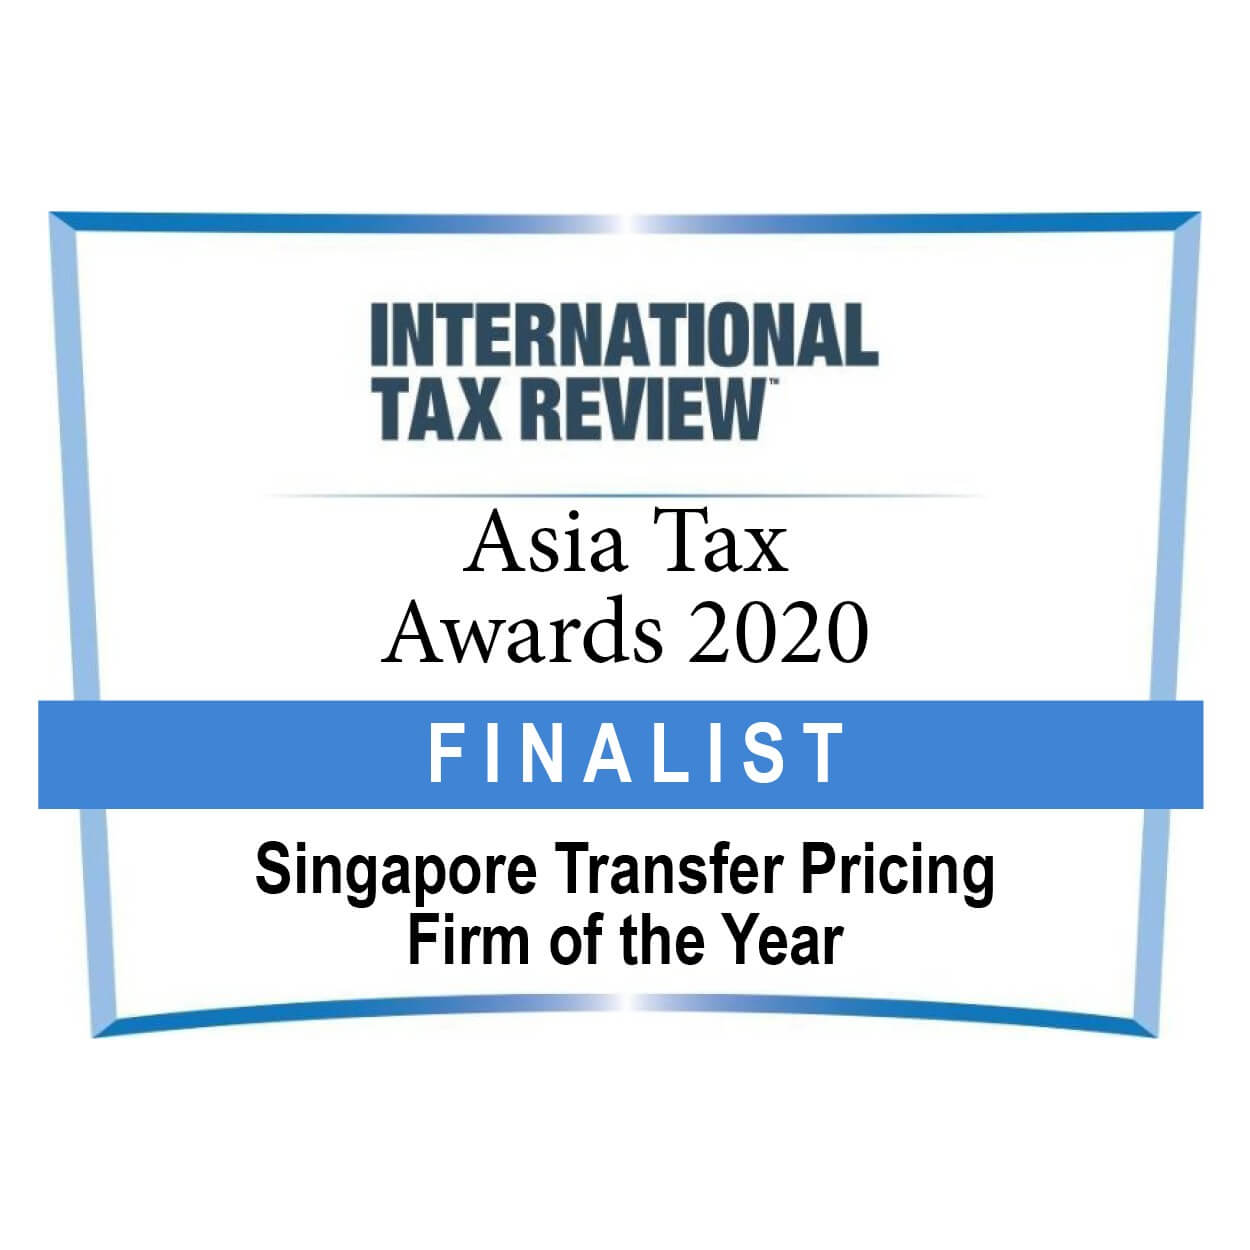 Singapore TP Firm - 2020